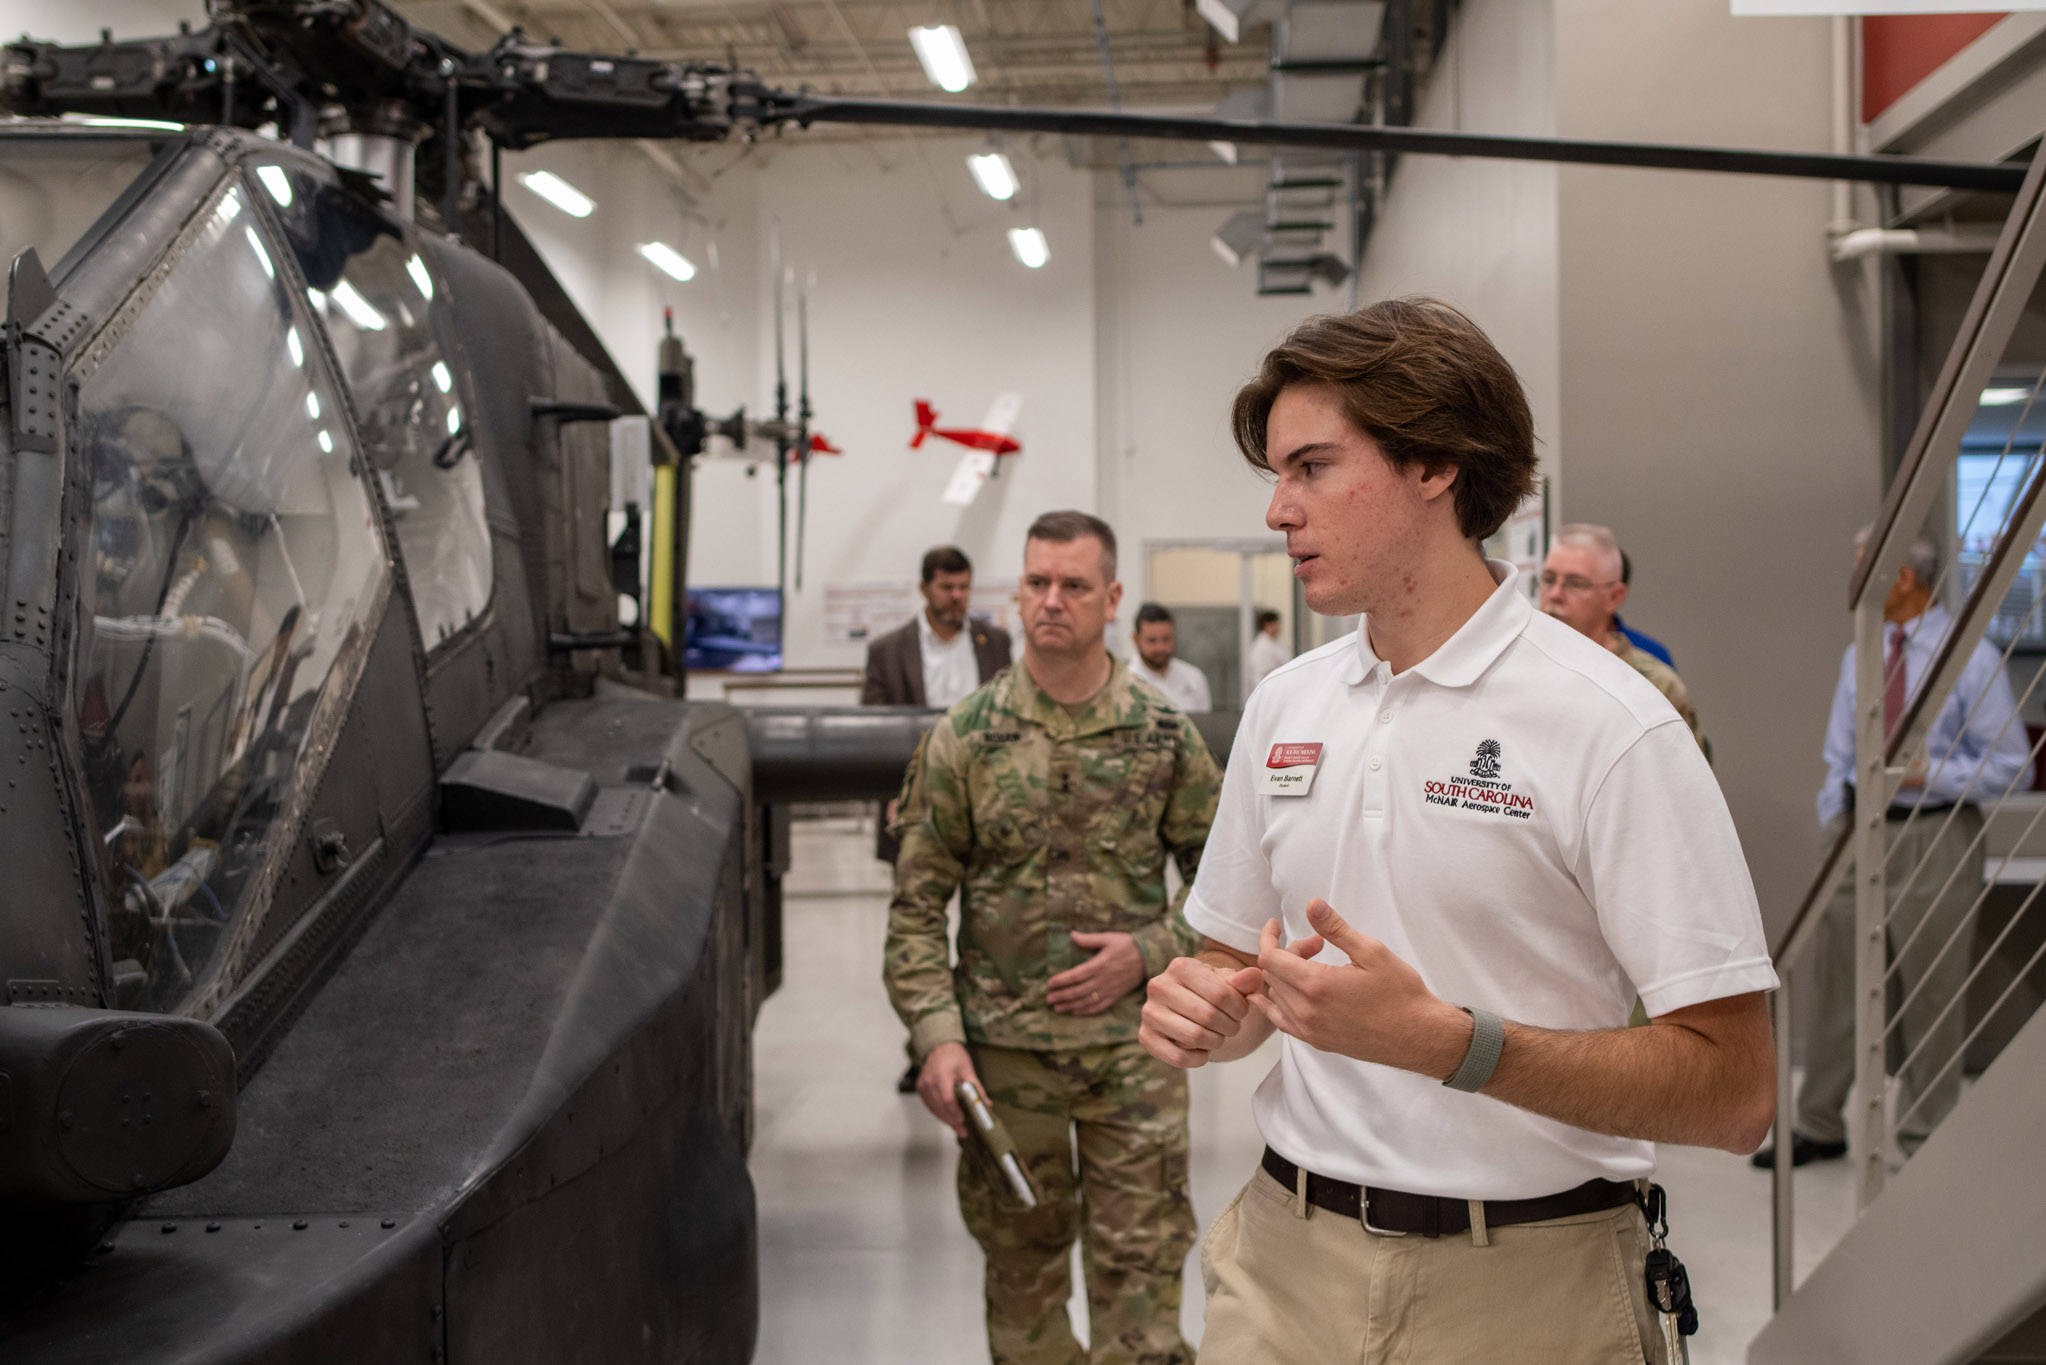 A student leads AMCOM Commander Maj. Gen. Todd Royar around the Apache Airframe in the McNair Center.